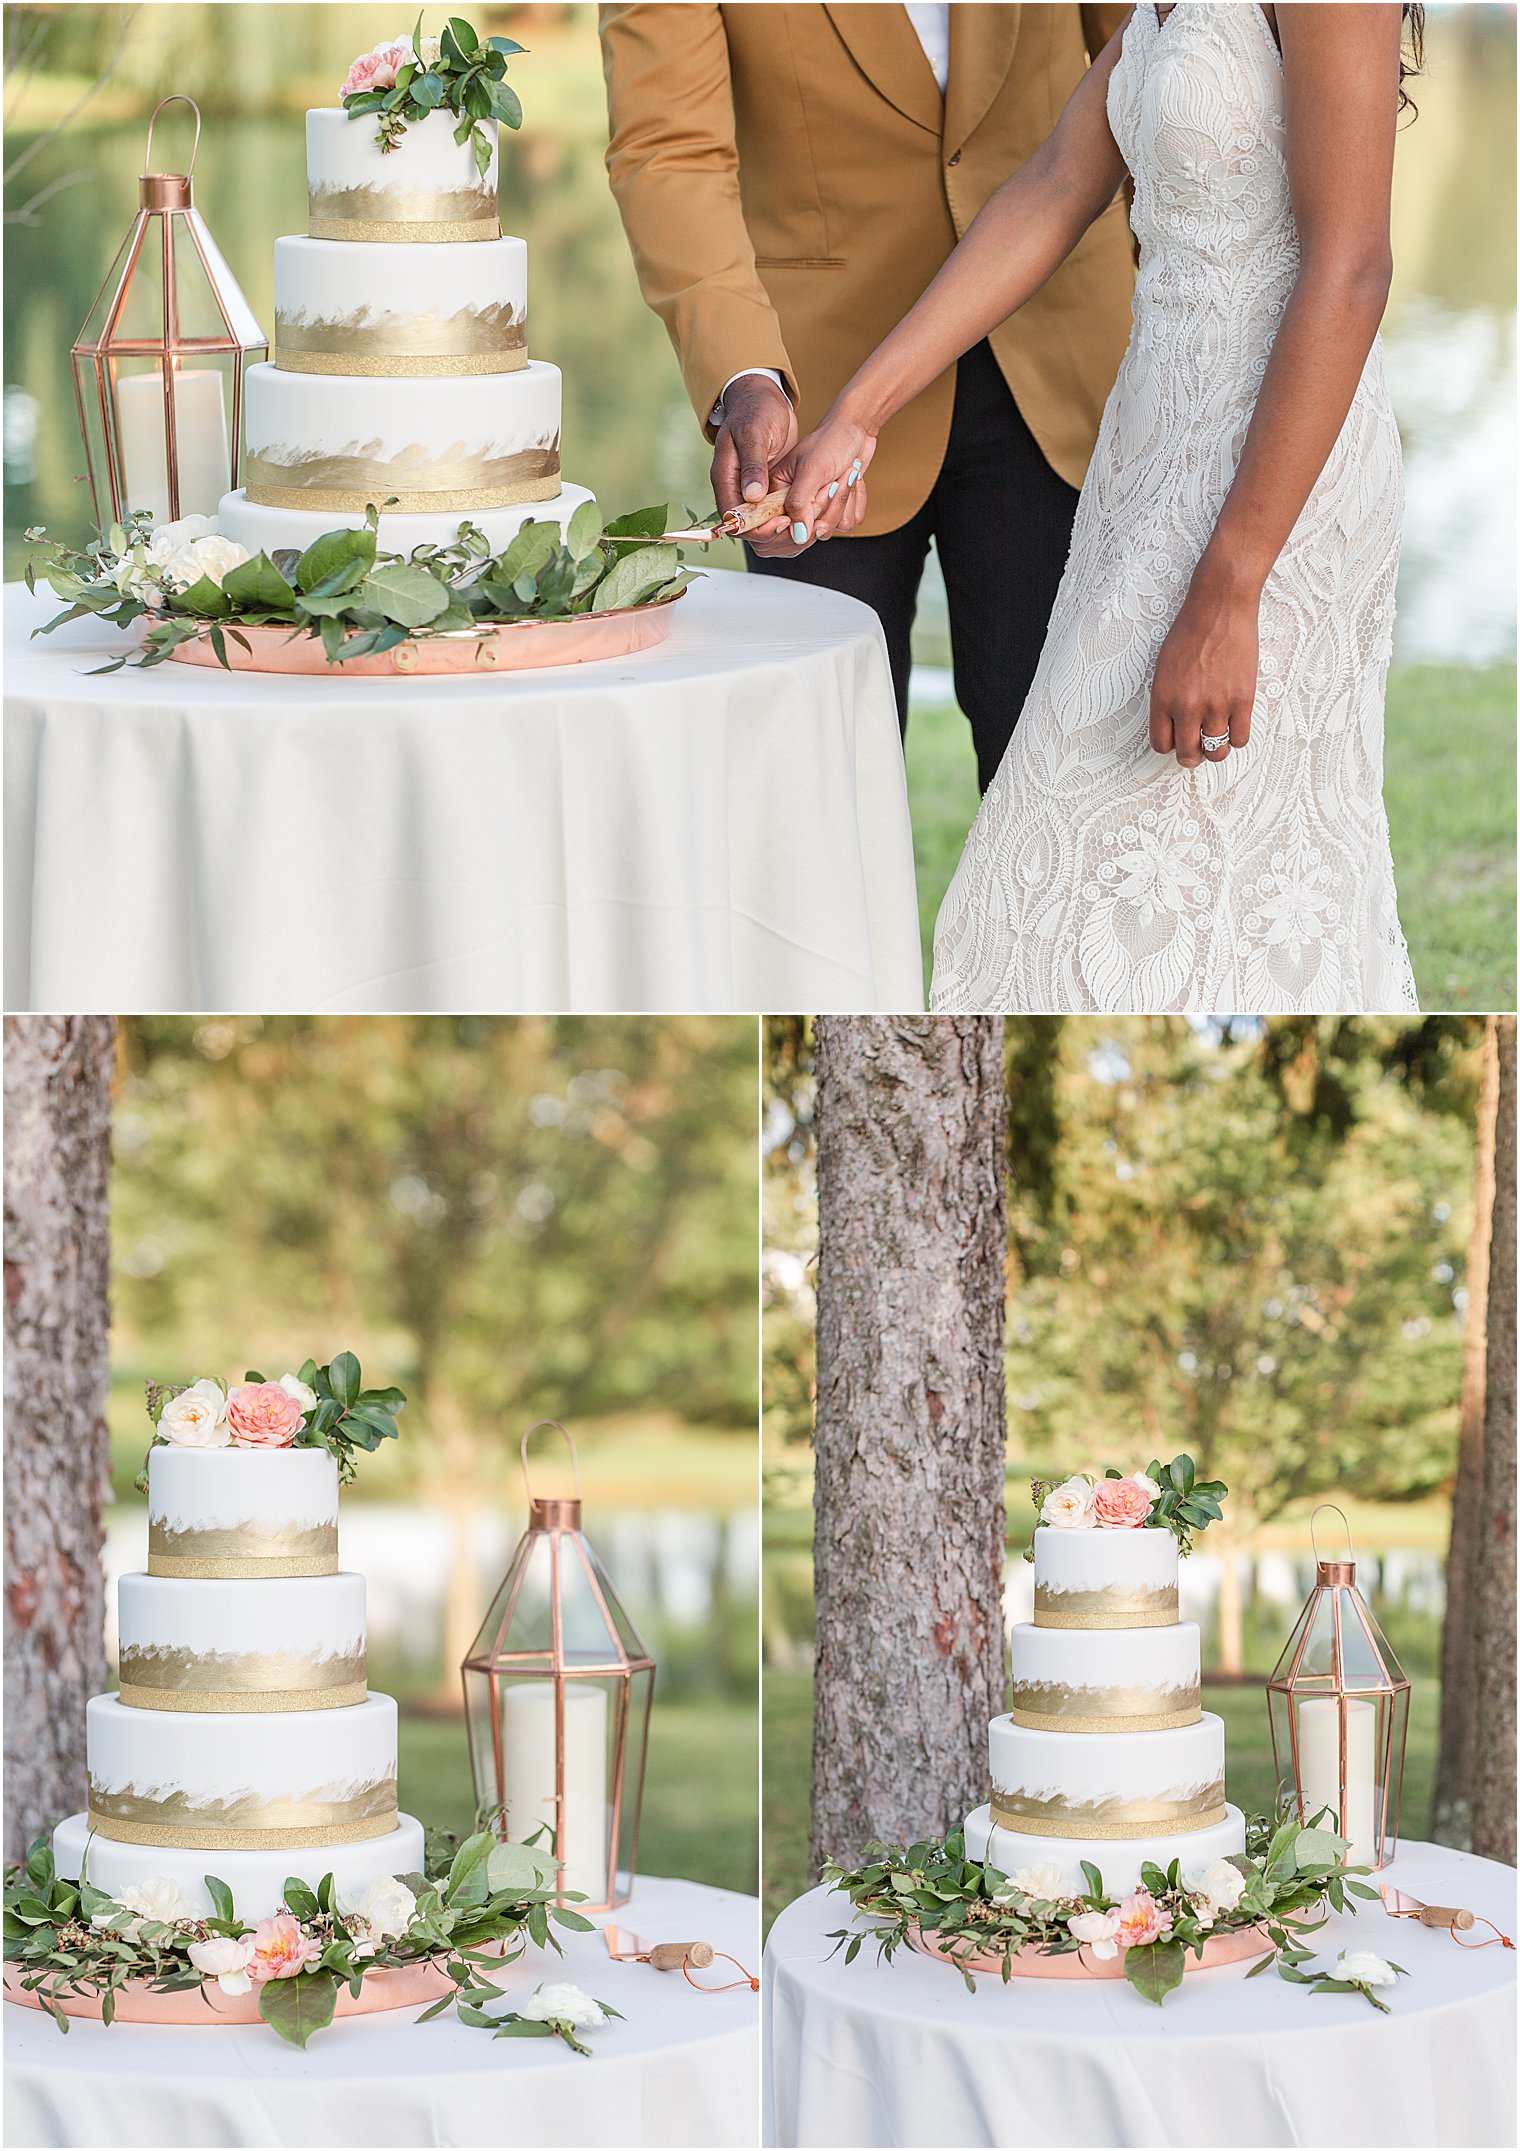 wedding cake featured in Windows on the water wedding editorial 